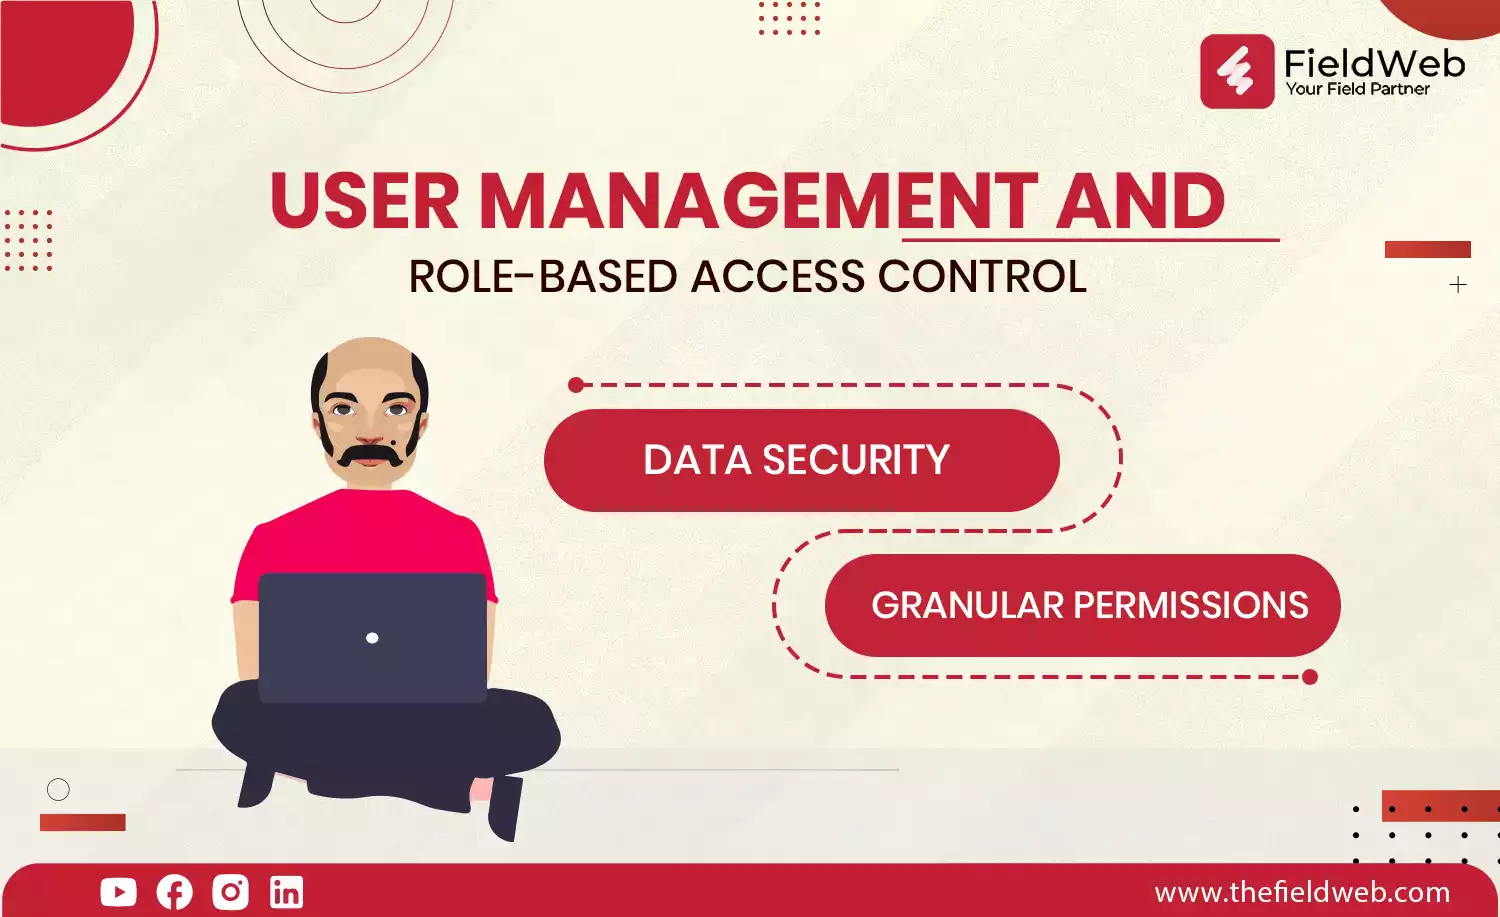 image is displaying User Management and Role-Based access control